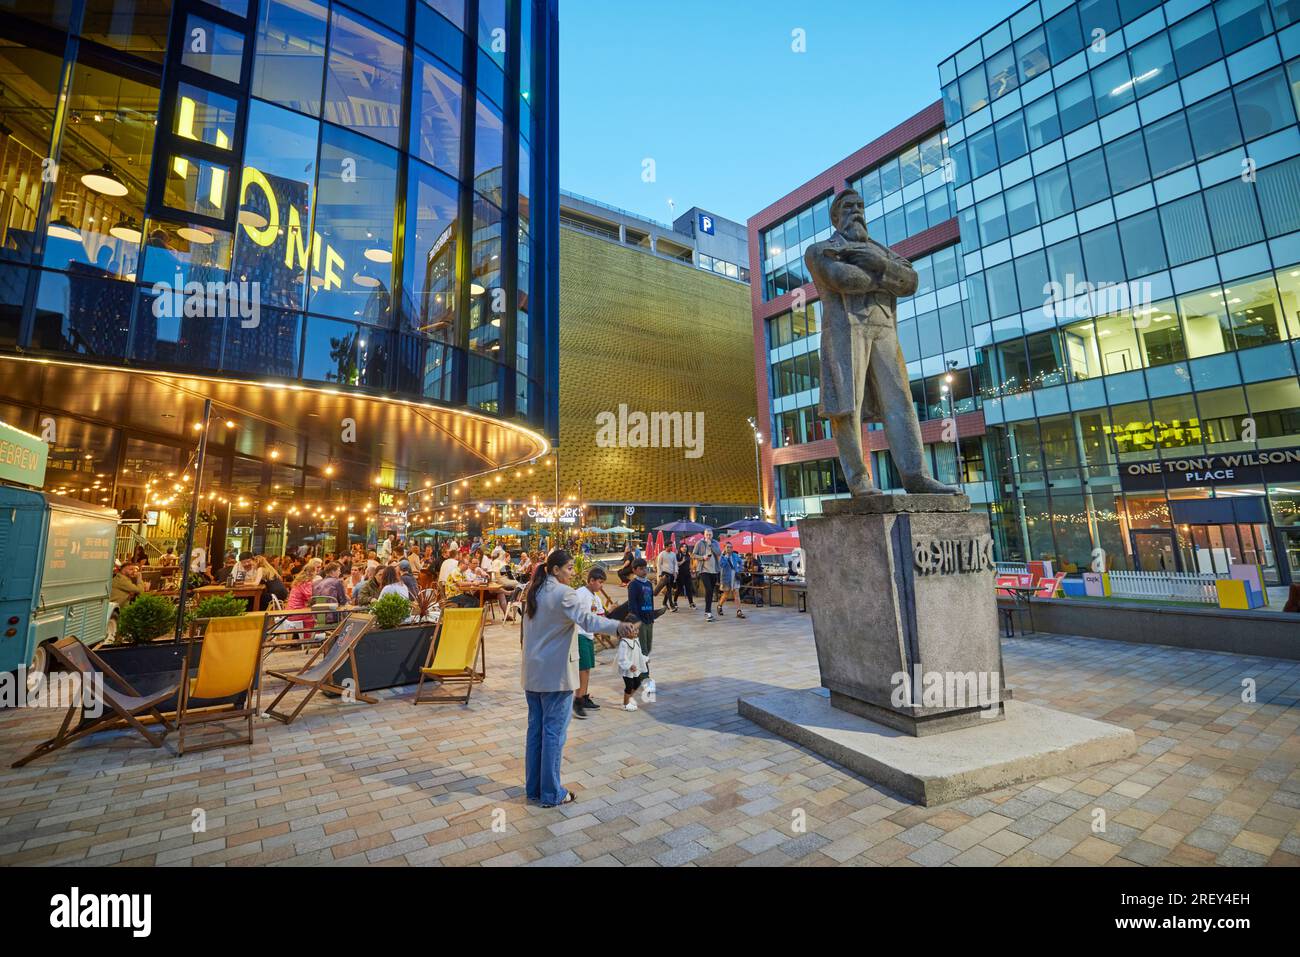 Soviet statue of Karl Marx’s collaborator Friedrich Engels Statue First Street Manchester after its move from Ukraine Stock Photo